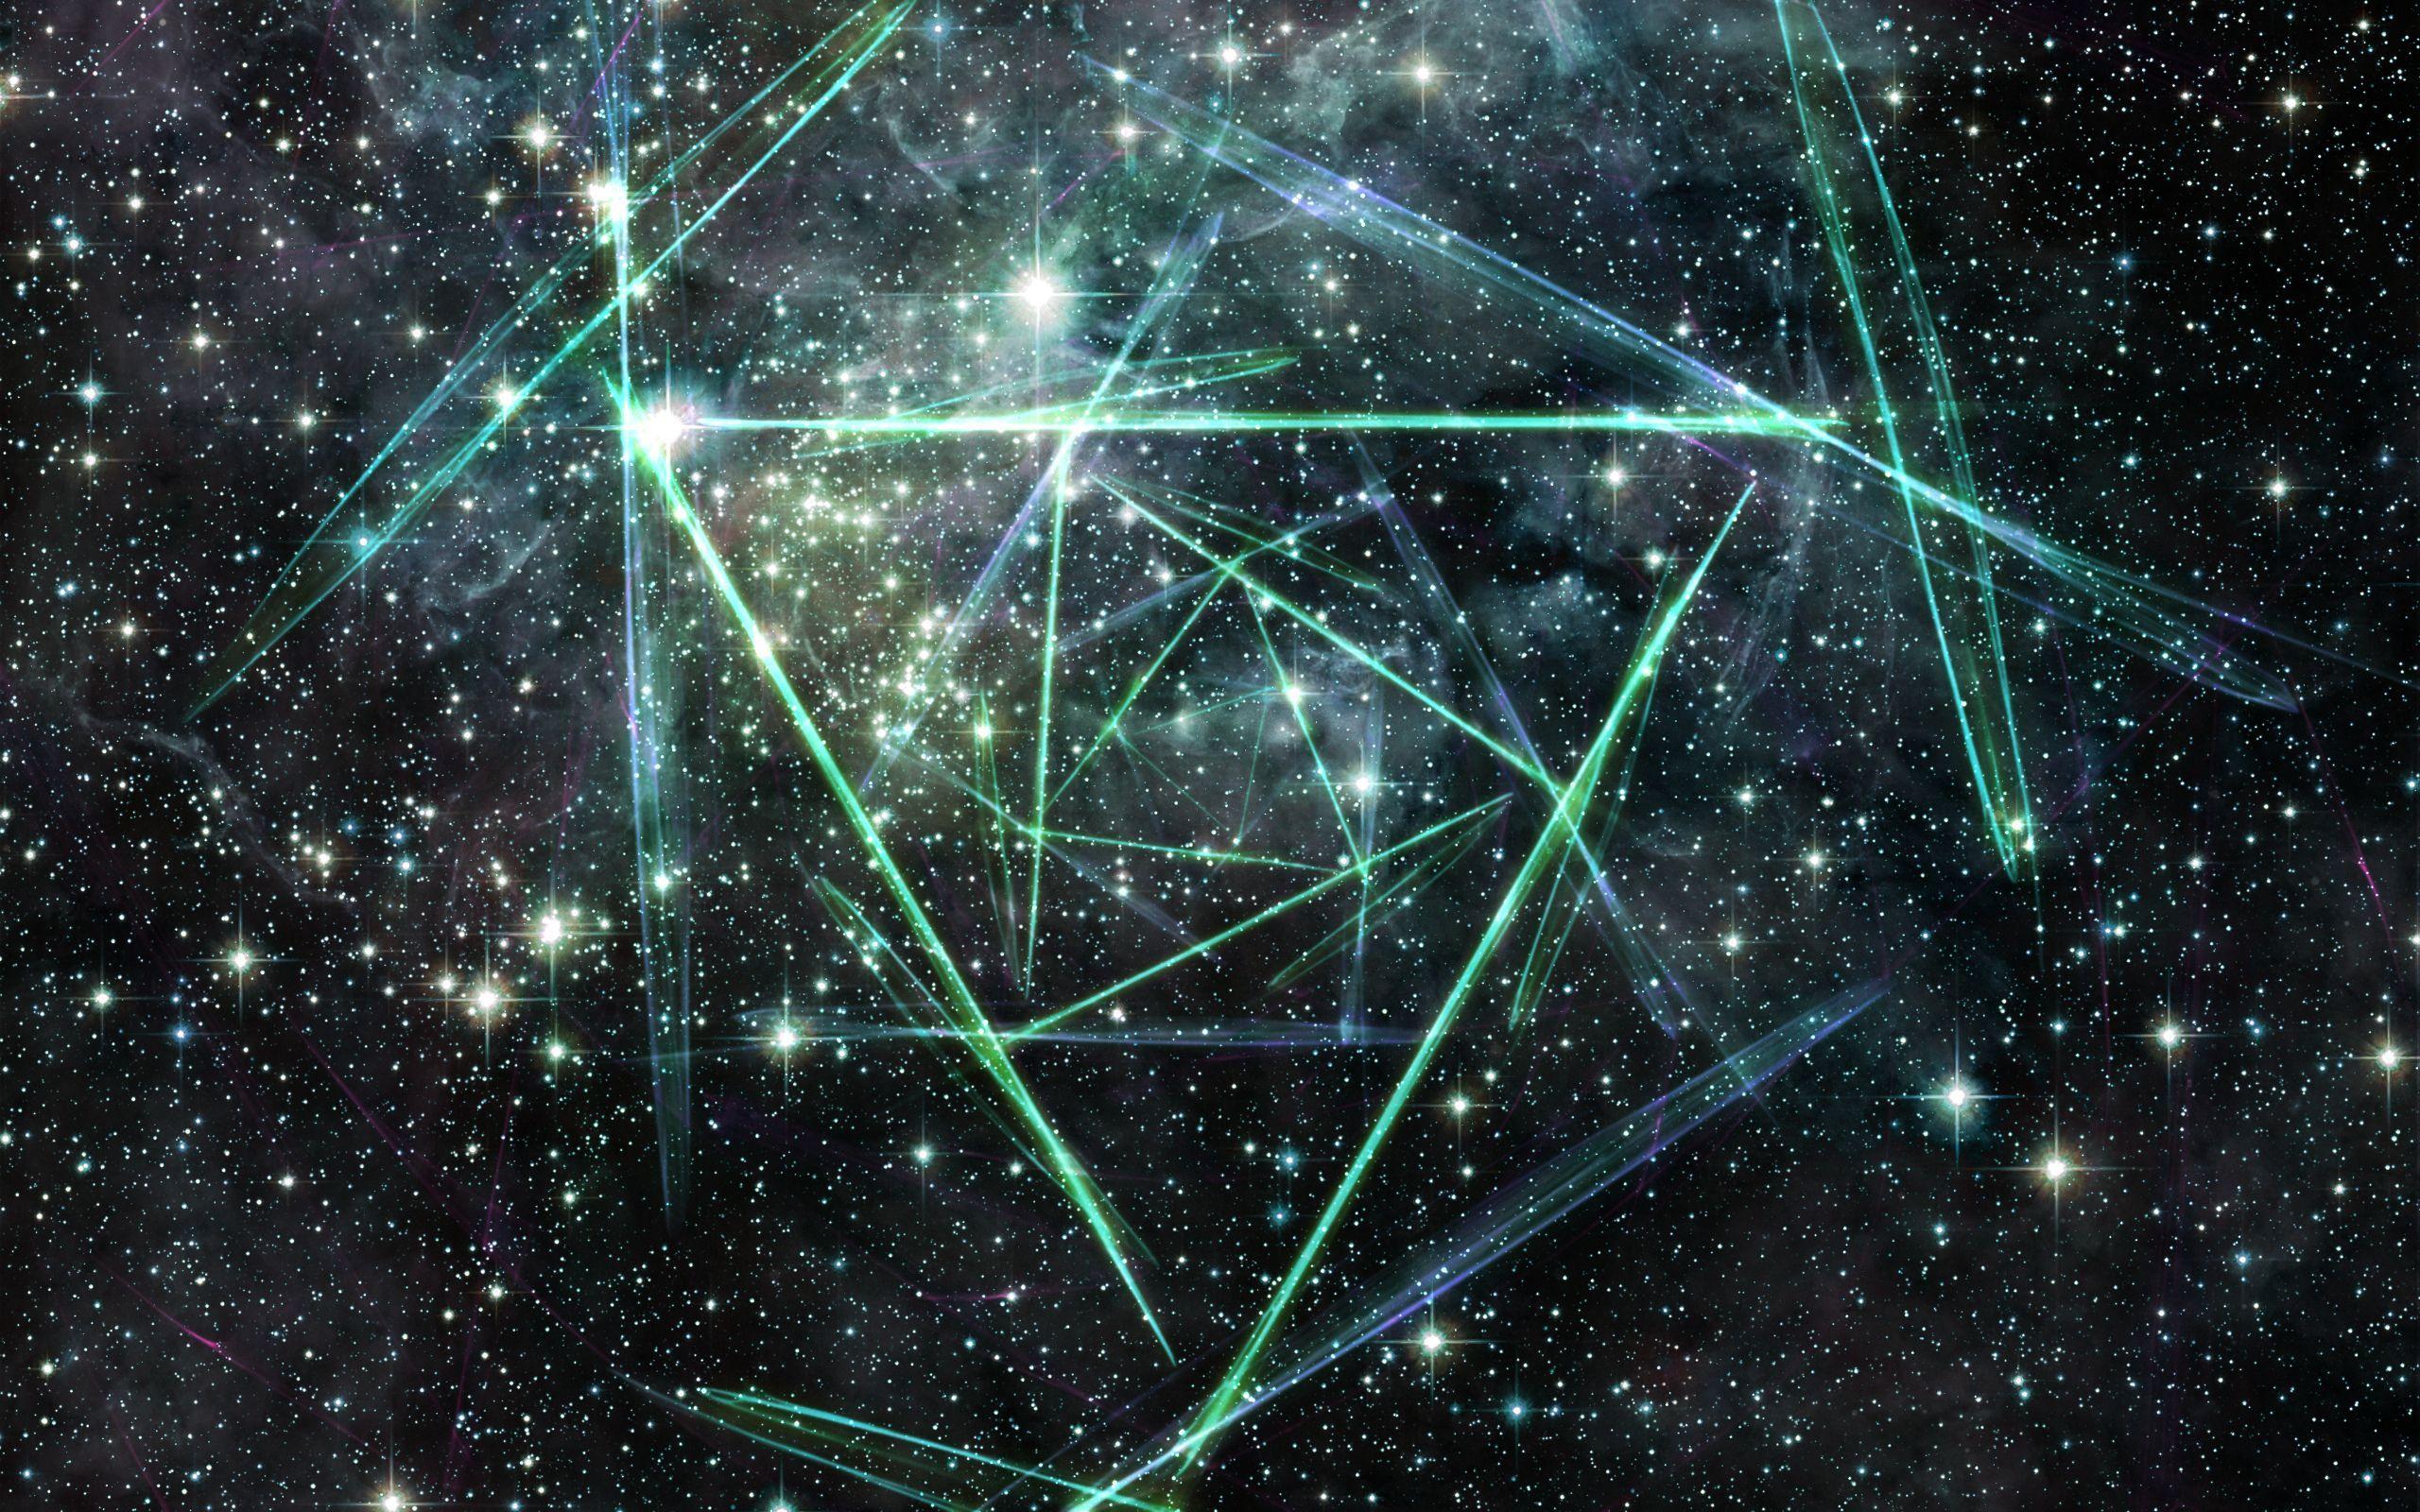 Universe Triangle Wallpapers - Top Free Universe Triangle Backgrounds ...